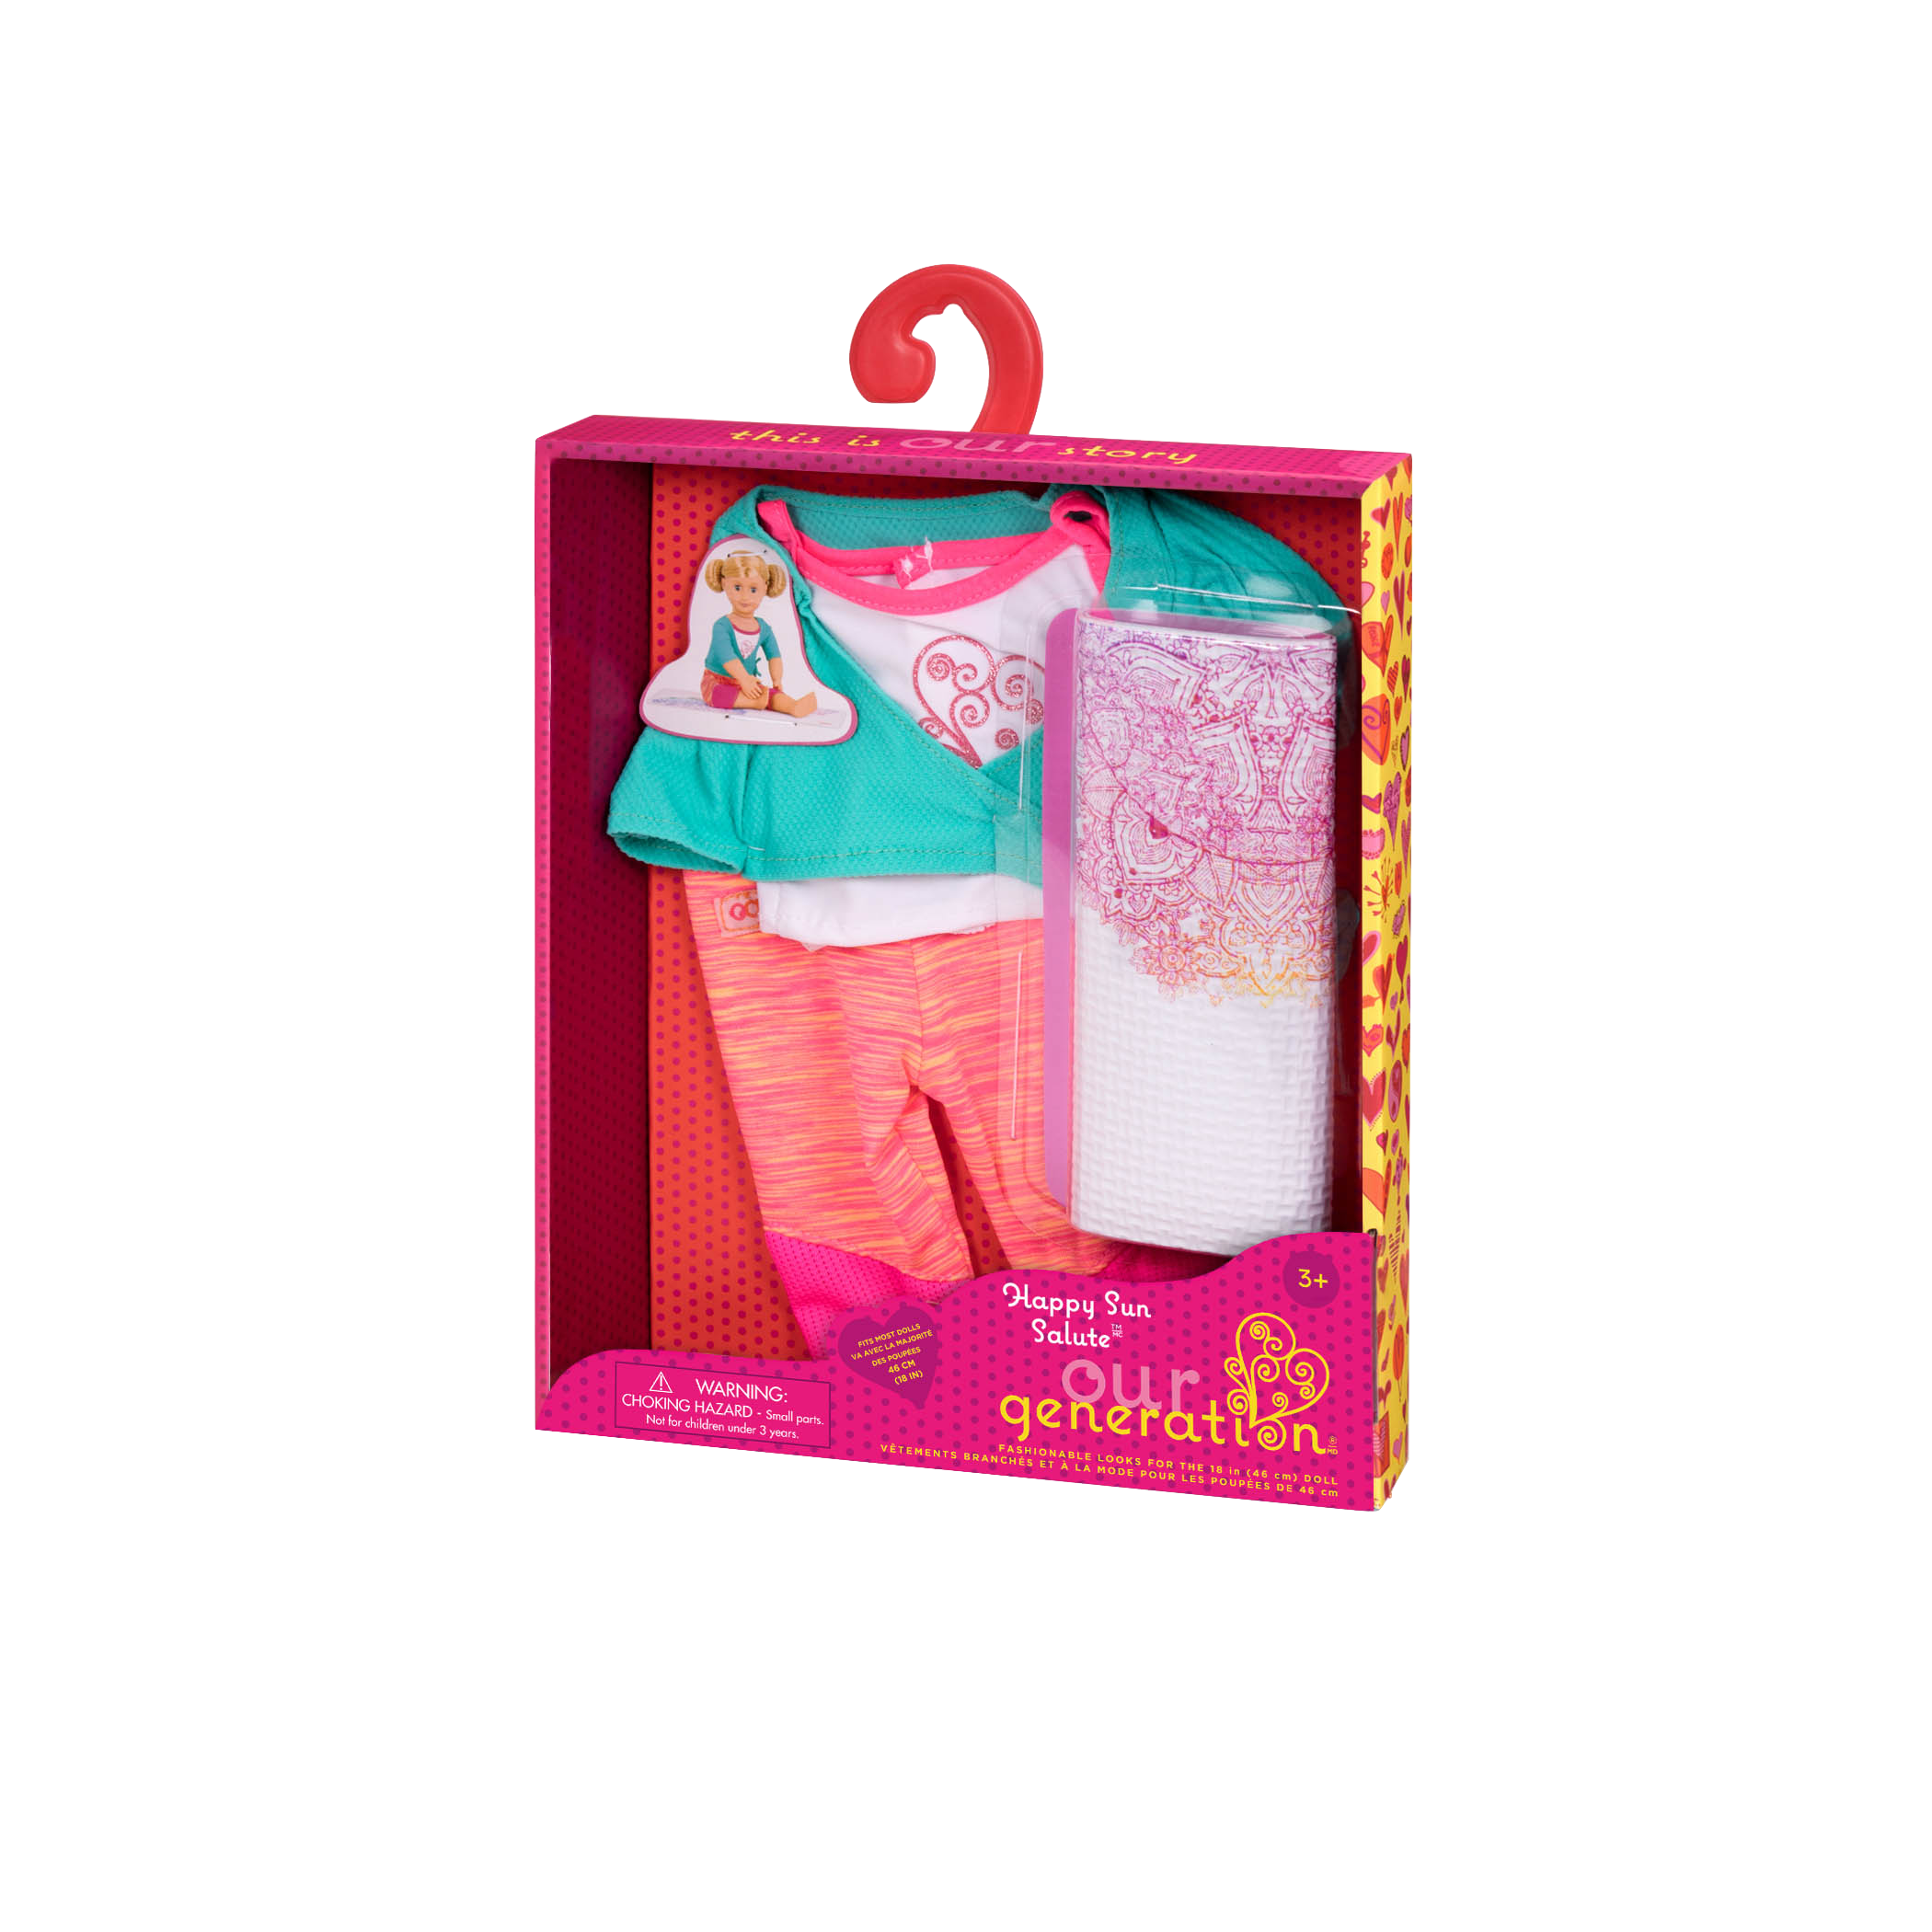 Happy Sun Salute yoga Outfit package